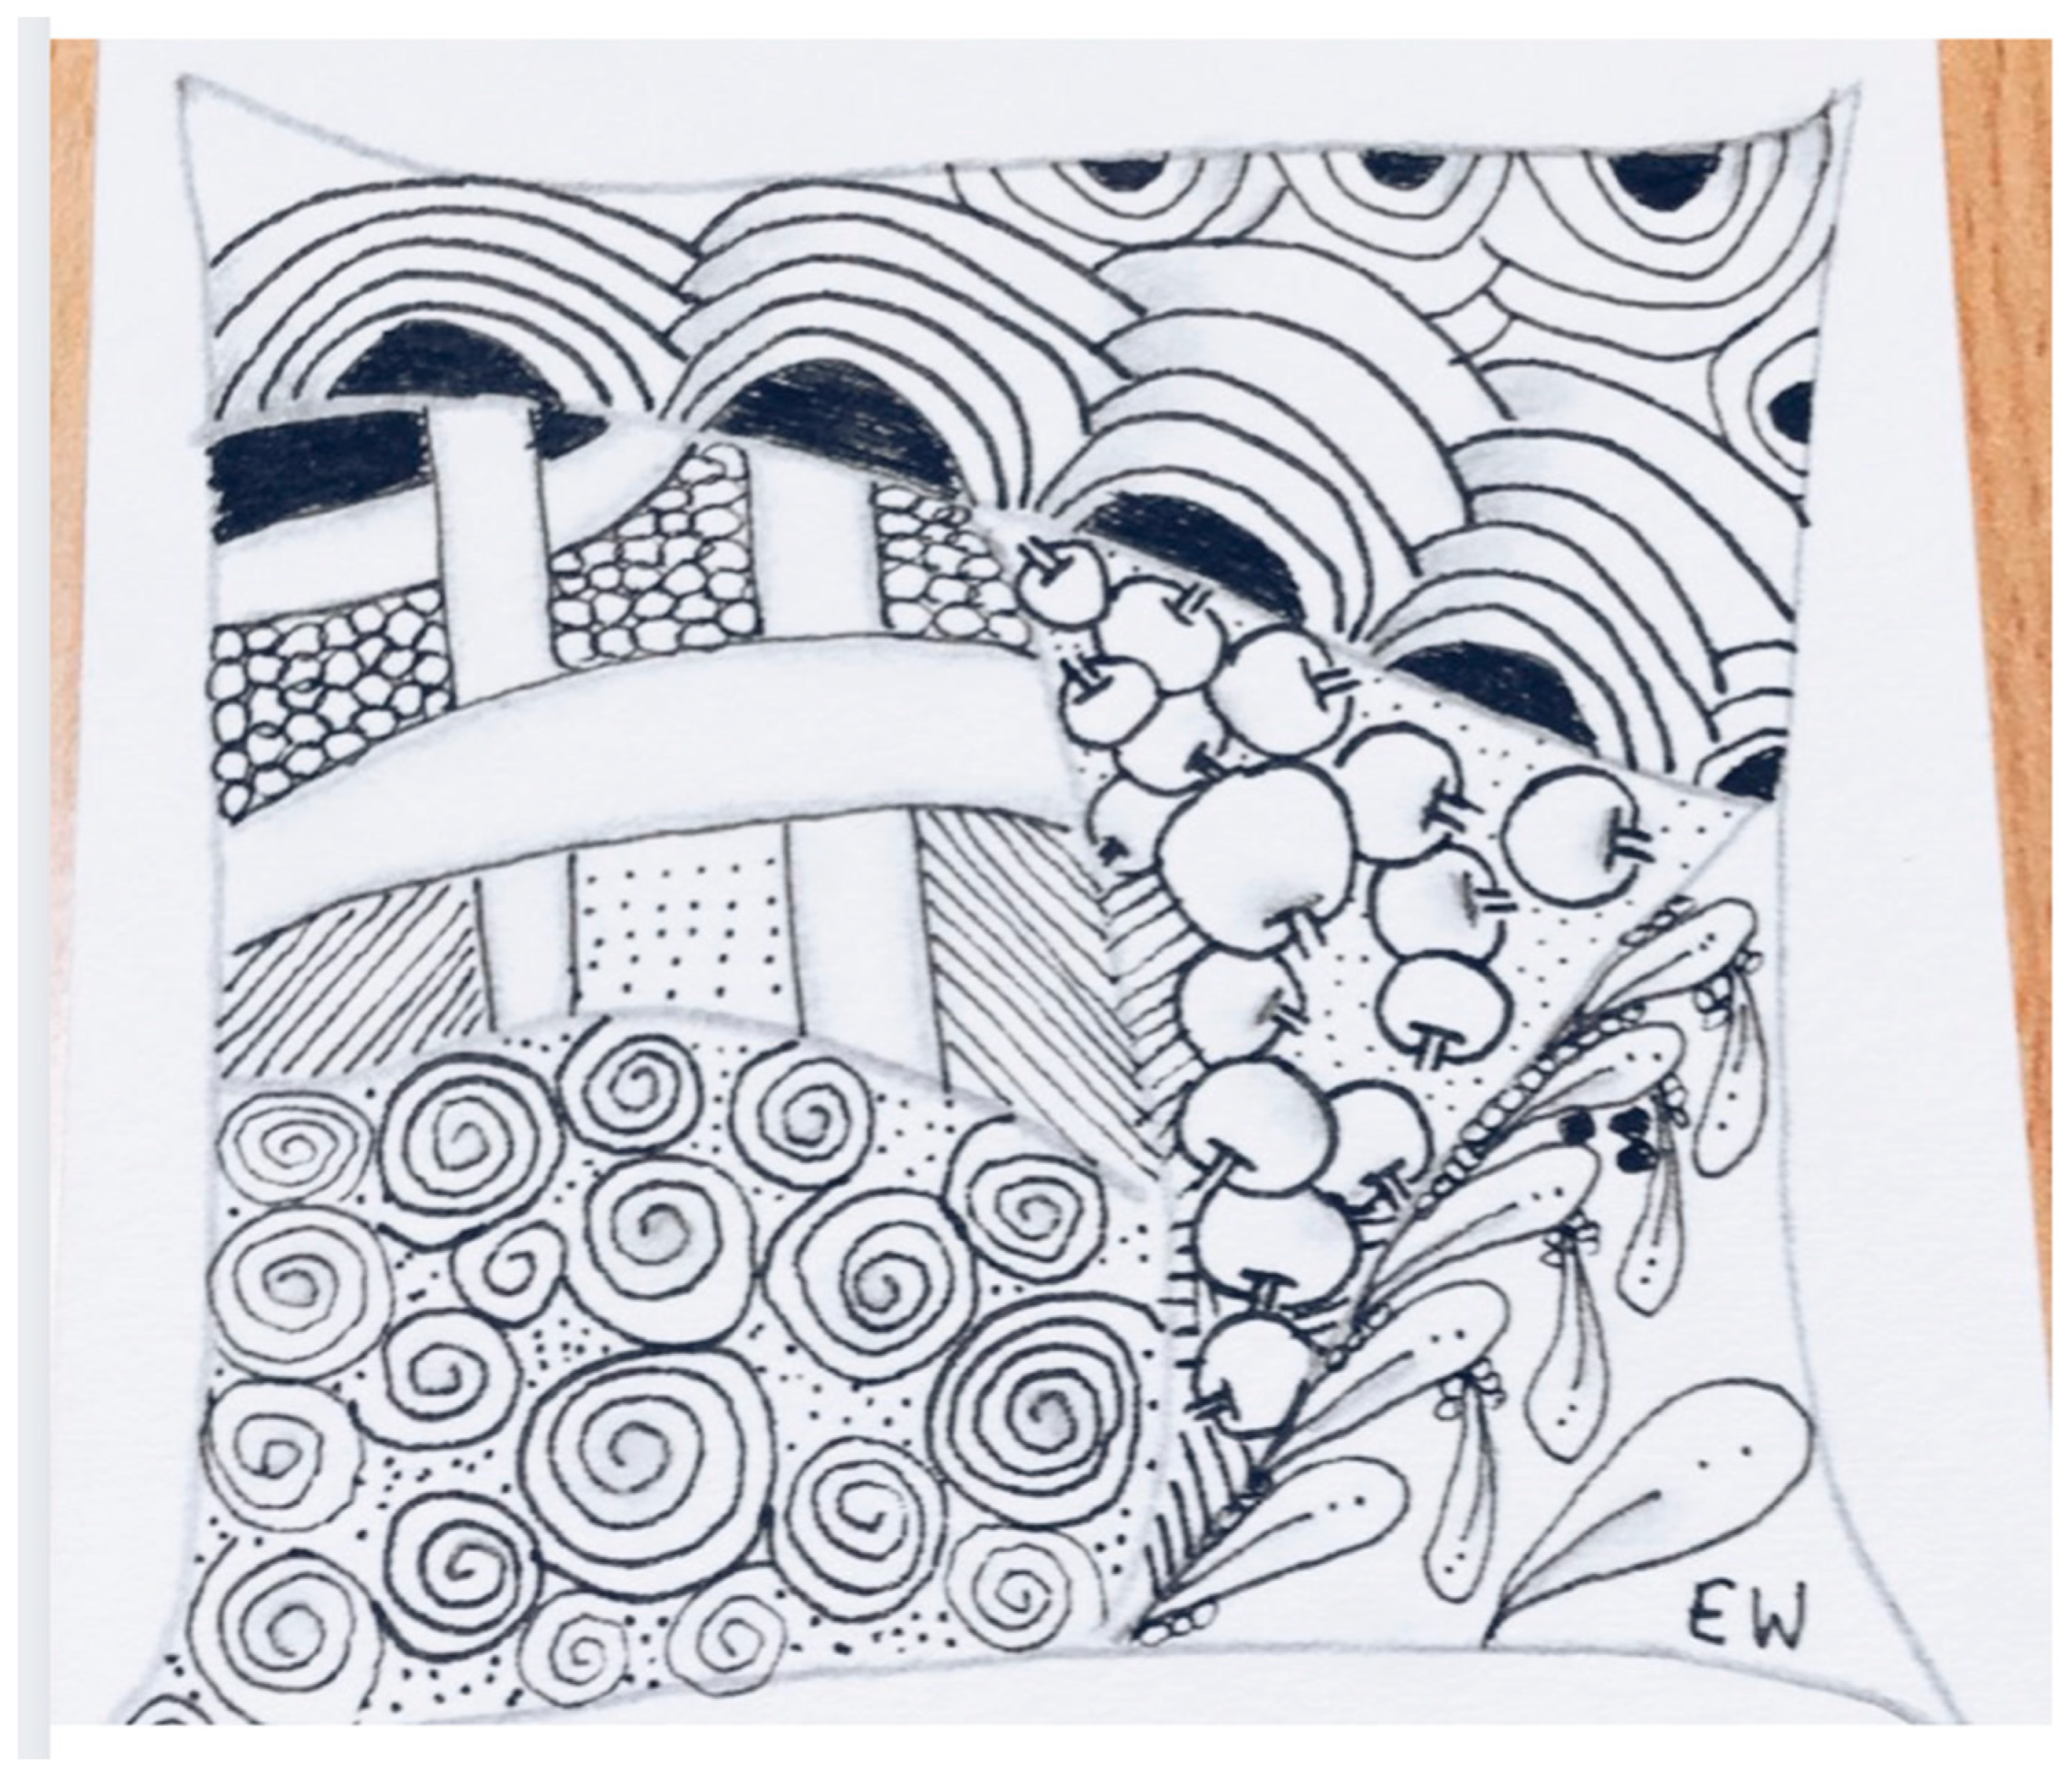 Mindfulness in the Classroom with Zentangles — A Montessori Story